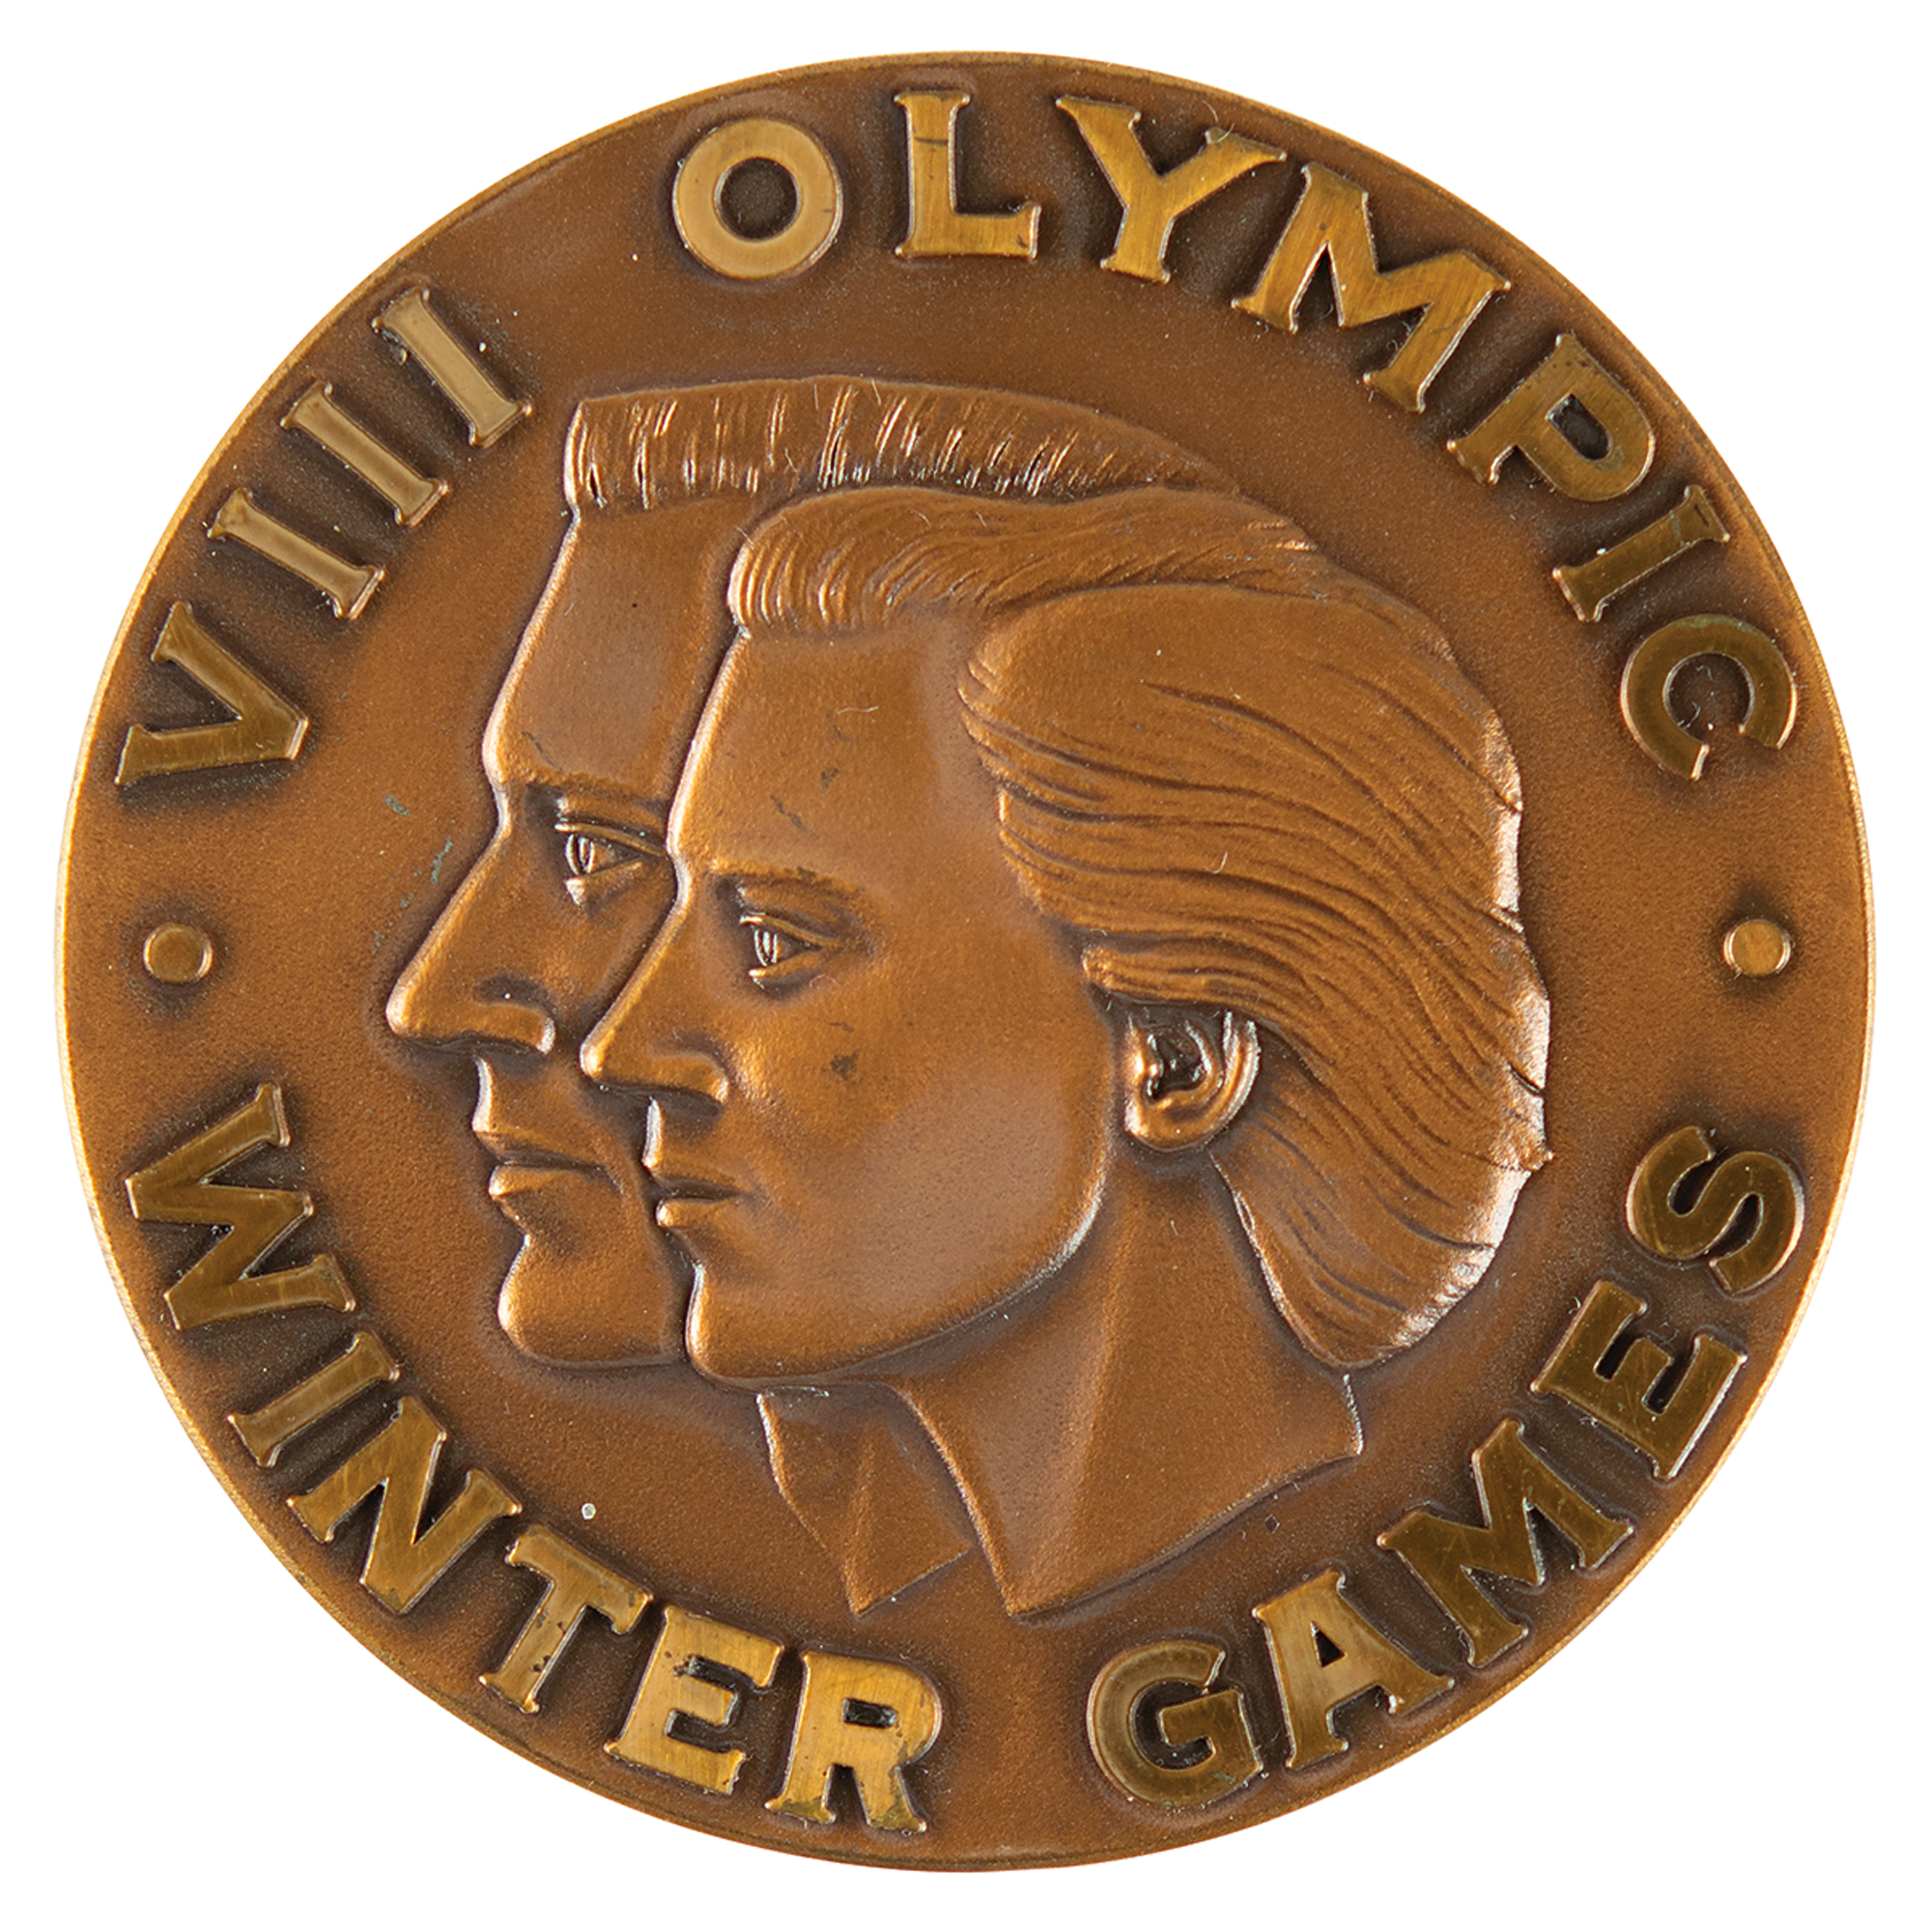 1960 - VIII Olympic Winter Games